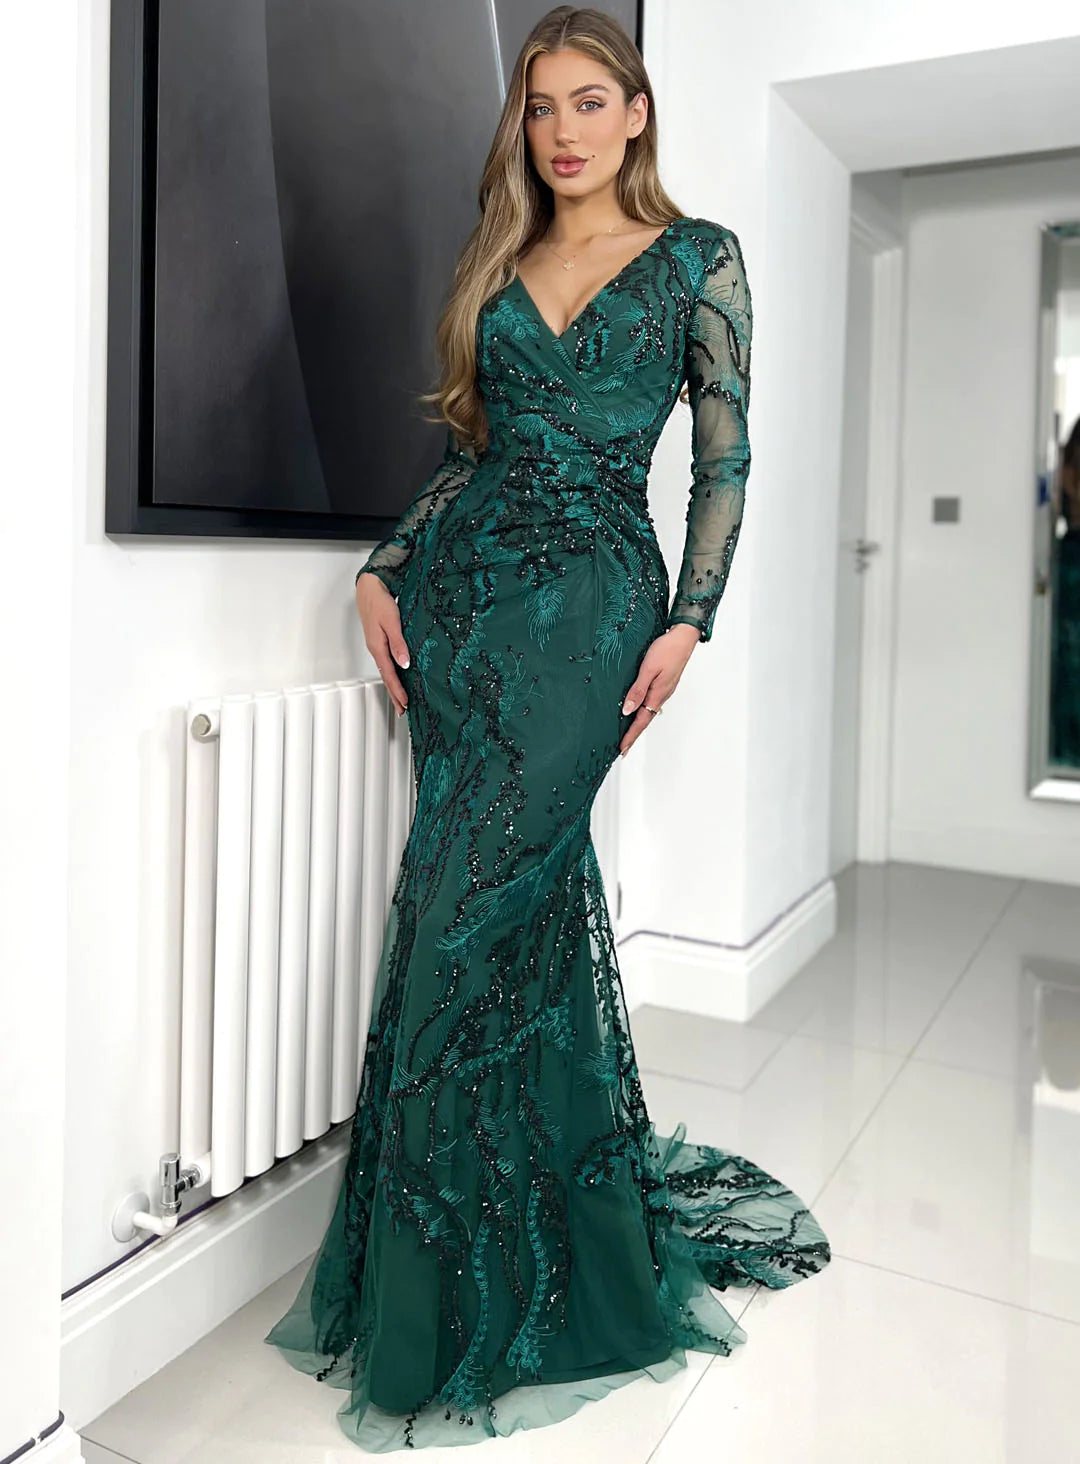 Jadore JX6092 Navy, Dusty Mauve, and Forrest Green Beaded Lace Dress with V-Neckline, Sheer Sleeves, and Ruching. Padded Bust, Small Train, and Center Back Zip. Sold by Madeline's Boutique in Toronto, Canada and Boca Raton, Florida.